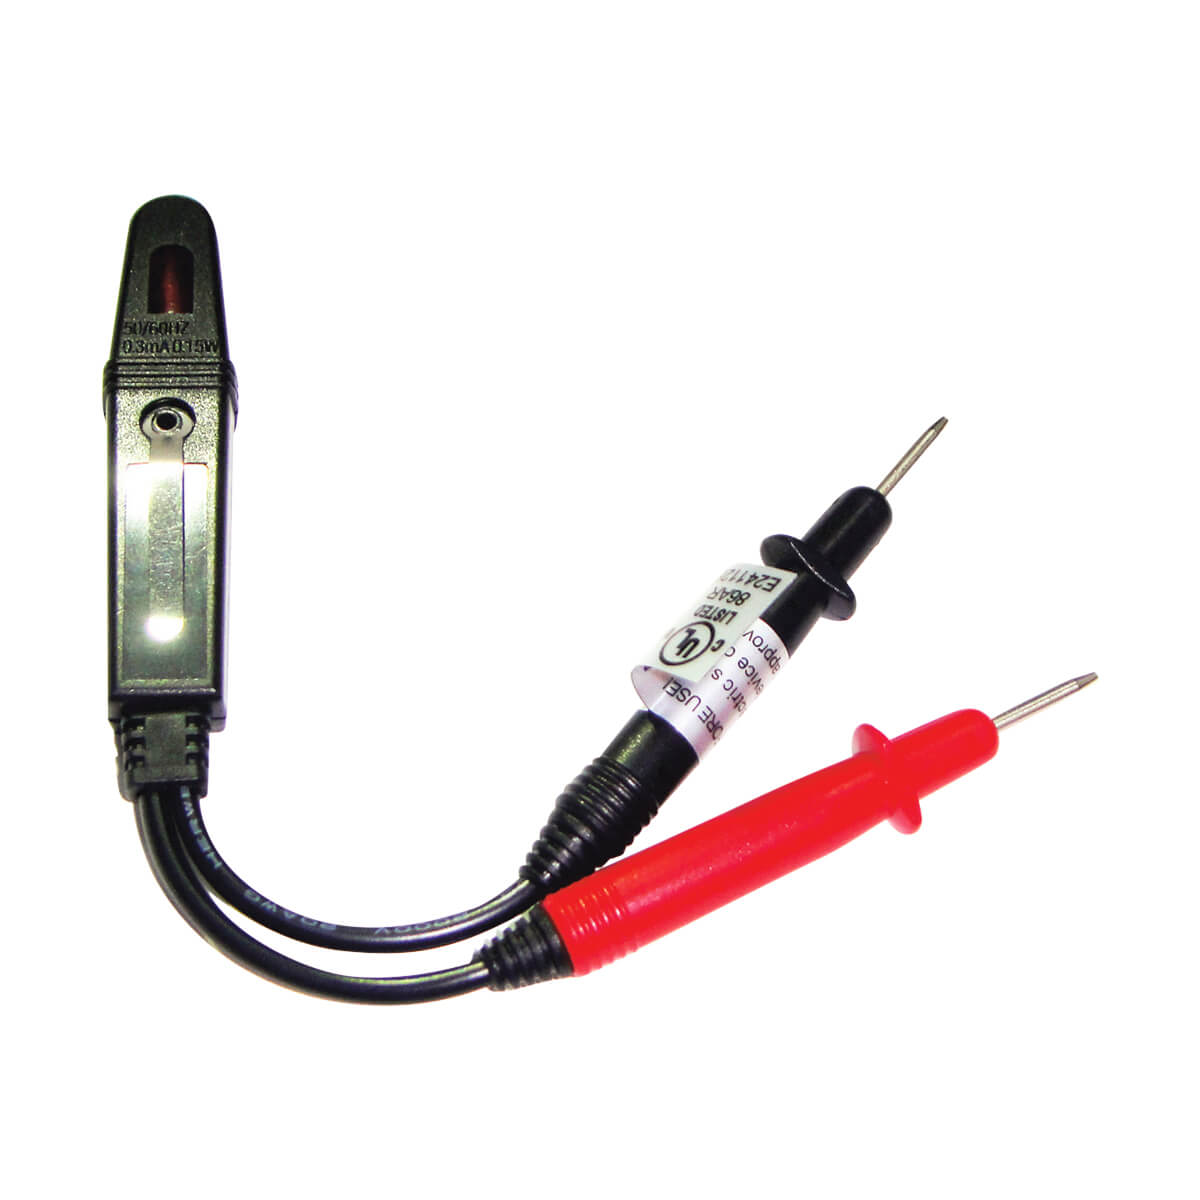 Two Lead Voltage Tester